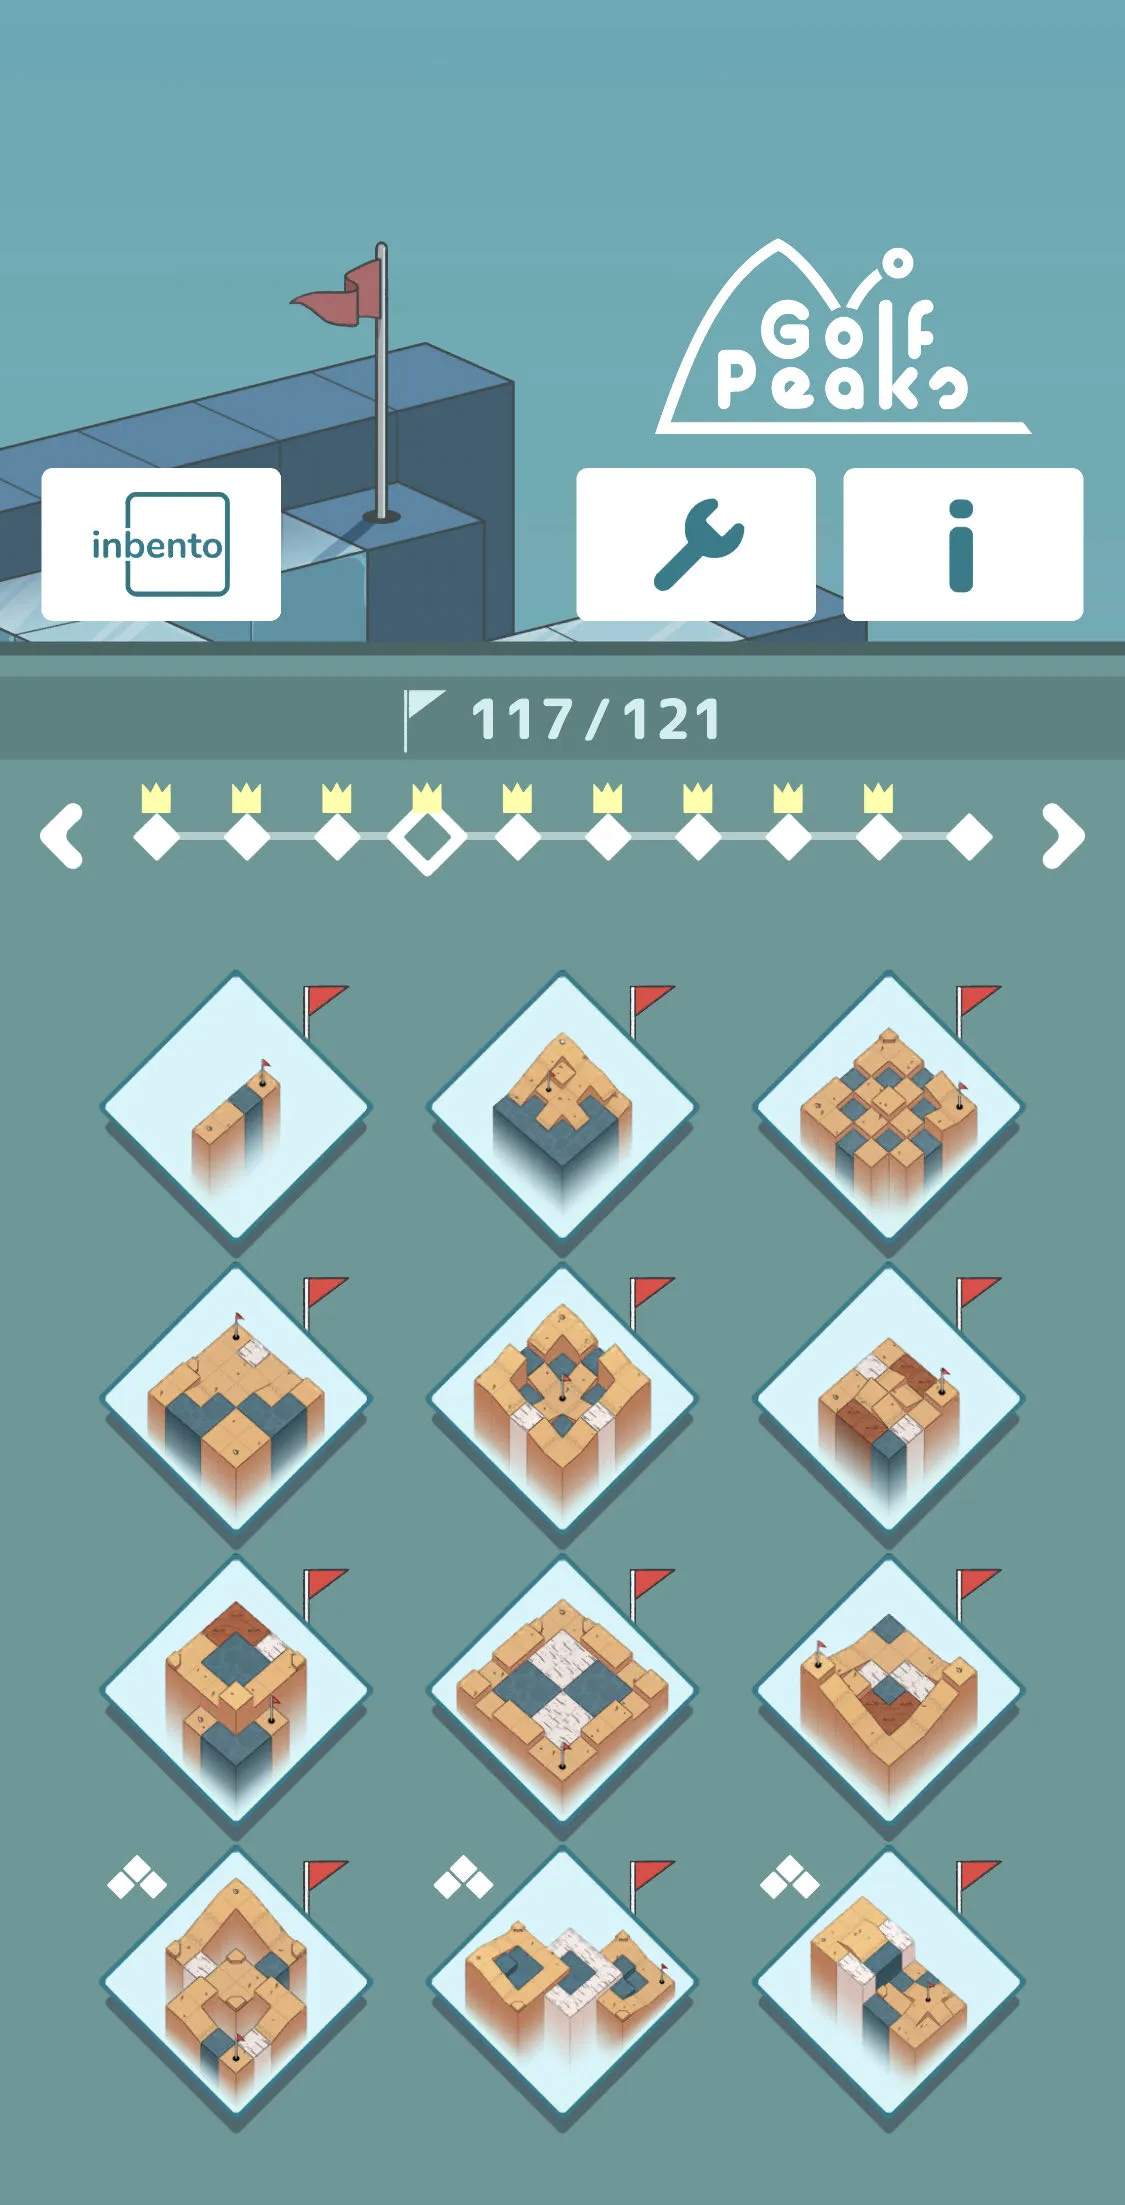 The 4th level of Golf peaks, there is a 3x4 grid of levels to select, 12 in total.